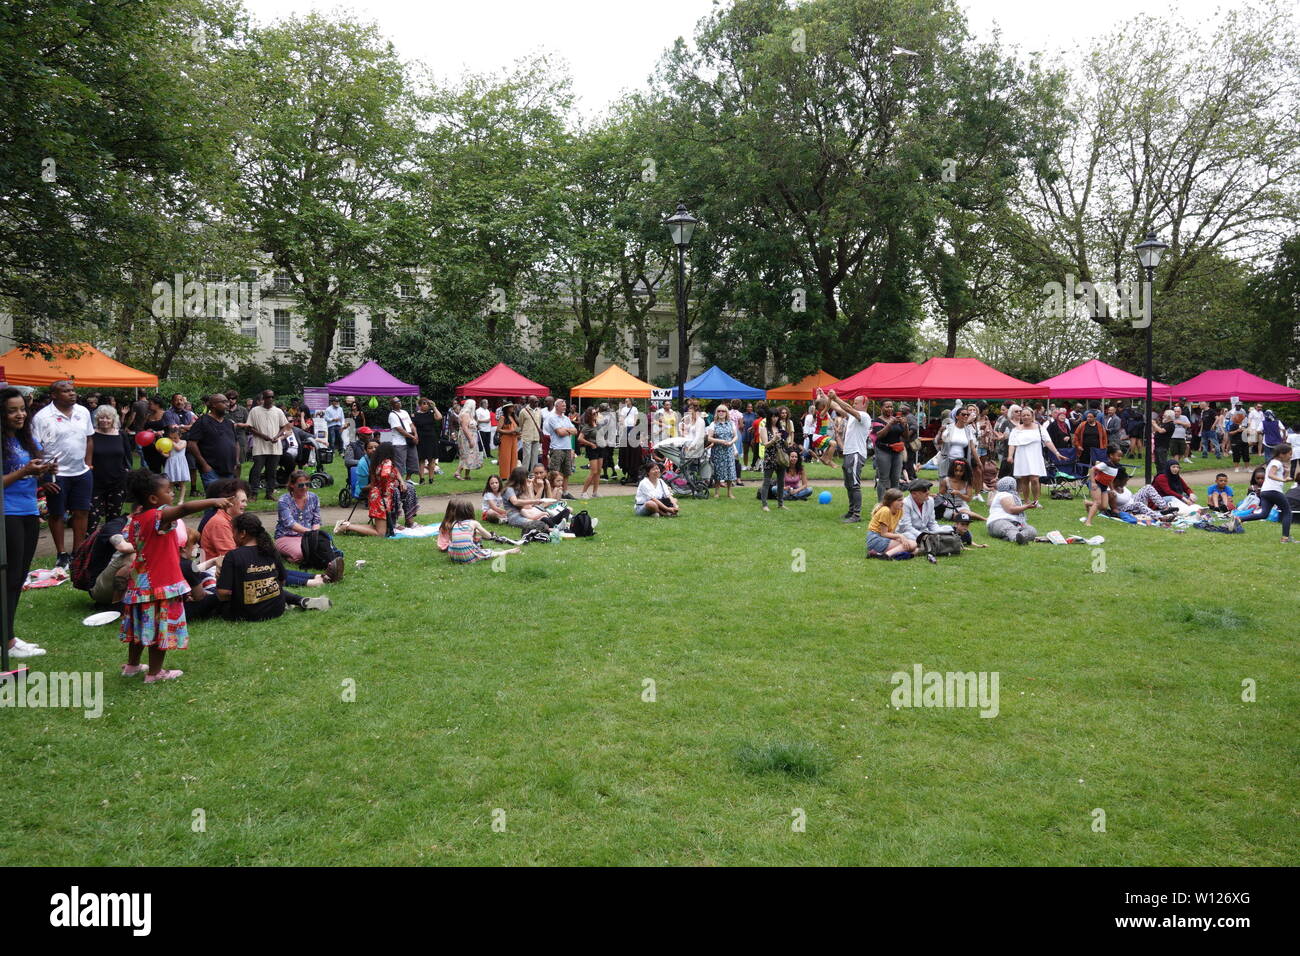 Liverpool, UK. 29th June, 2019. Celebrating Liverpool's Windrush generation at a community family fun day event in Faulkner Square Park, Toxteth, Liverpool with performances from Carroll Thompson and local poet Levi Tafari. Credit: ken biggs/Alamy Live News Stock Photo